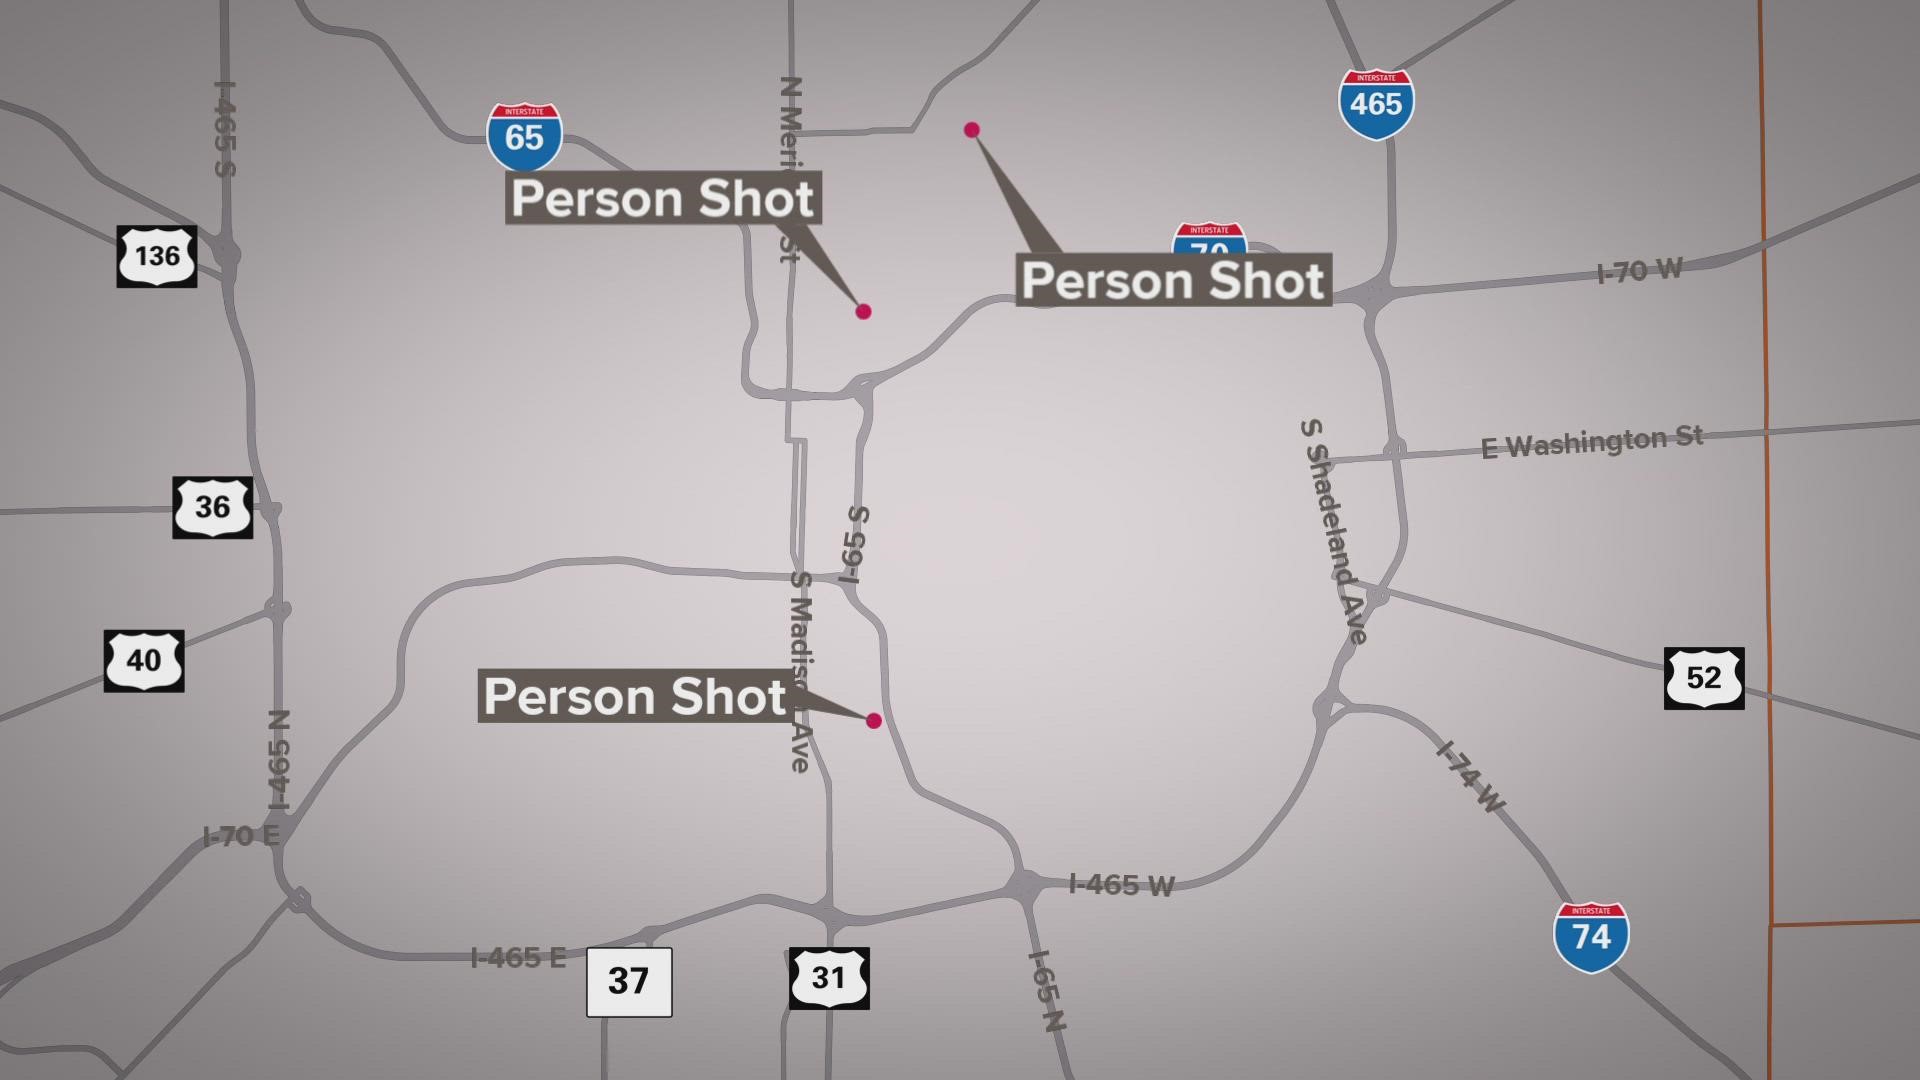 IMPD is investigating three shootings between late Sunday night and early Monday morning. One man was killed.